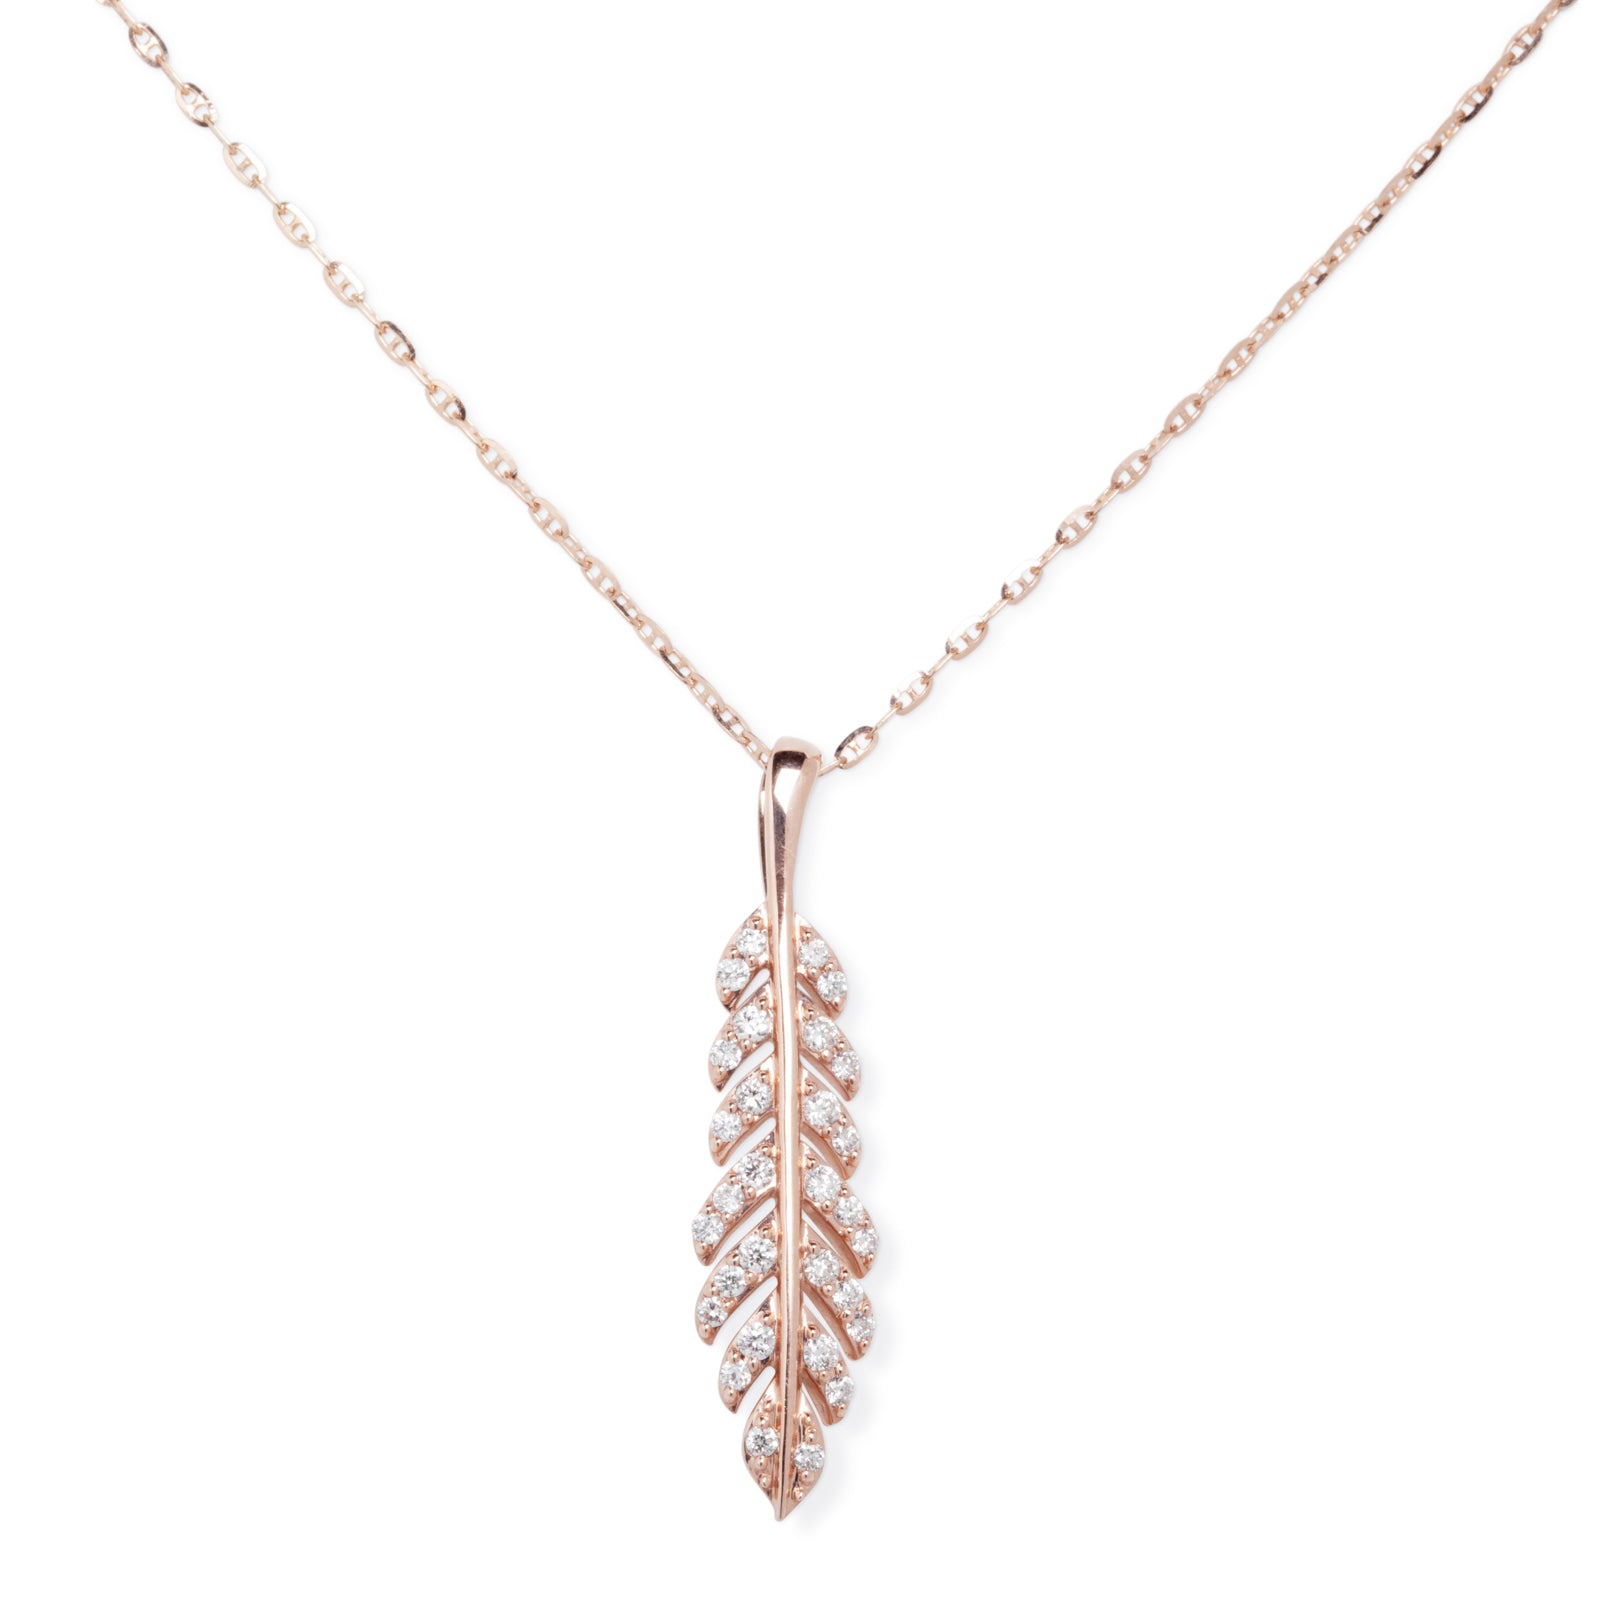 Swarovski Nice Feather Pendant Necklace Rose Gold-Tone Plated White  Crystals 5663483 - First Class Watches™ HKG